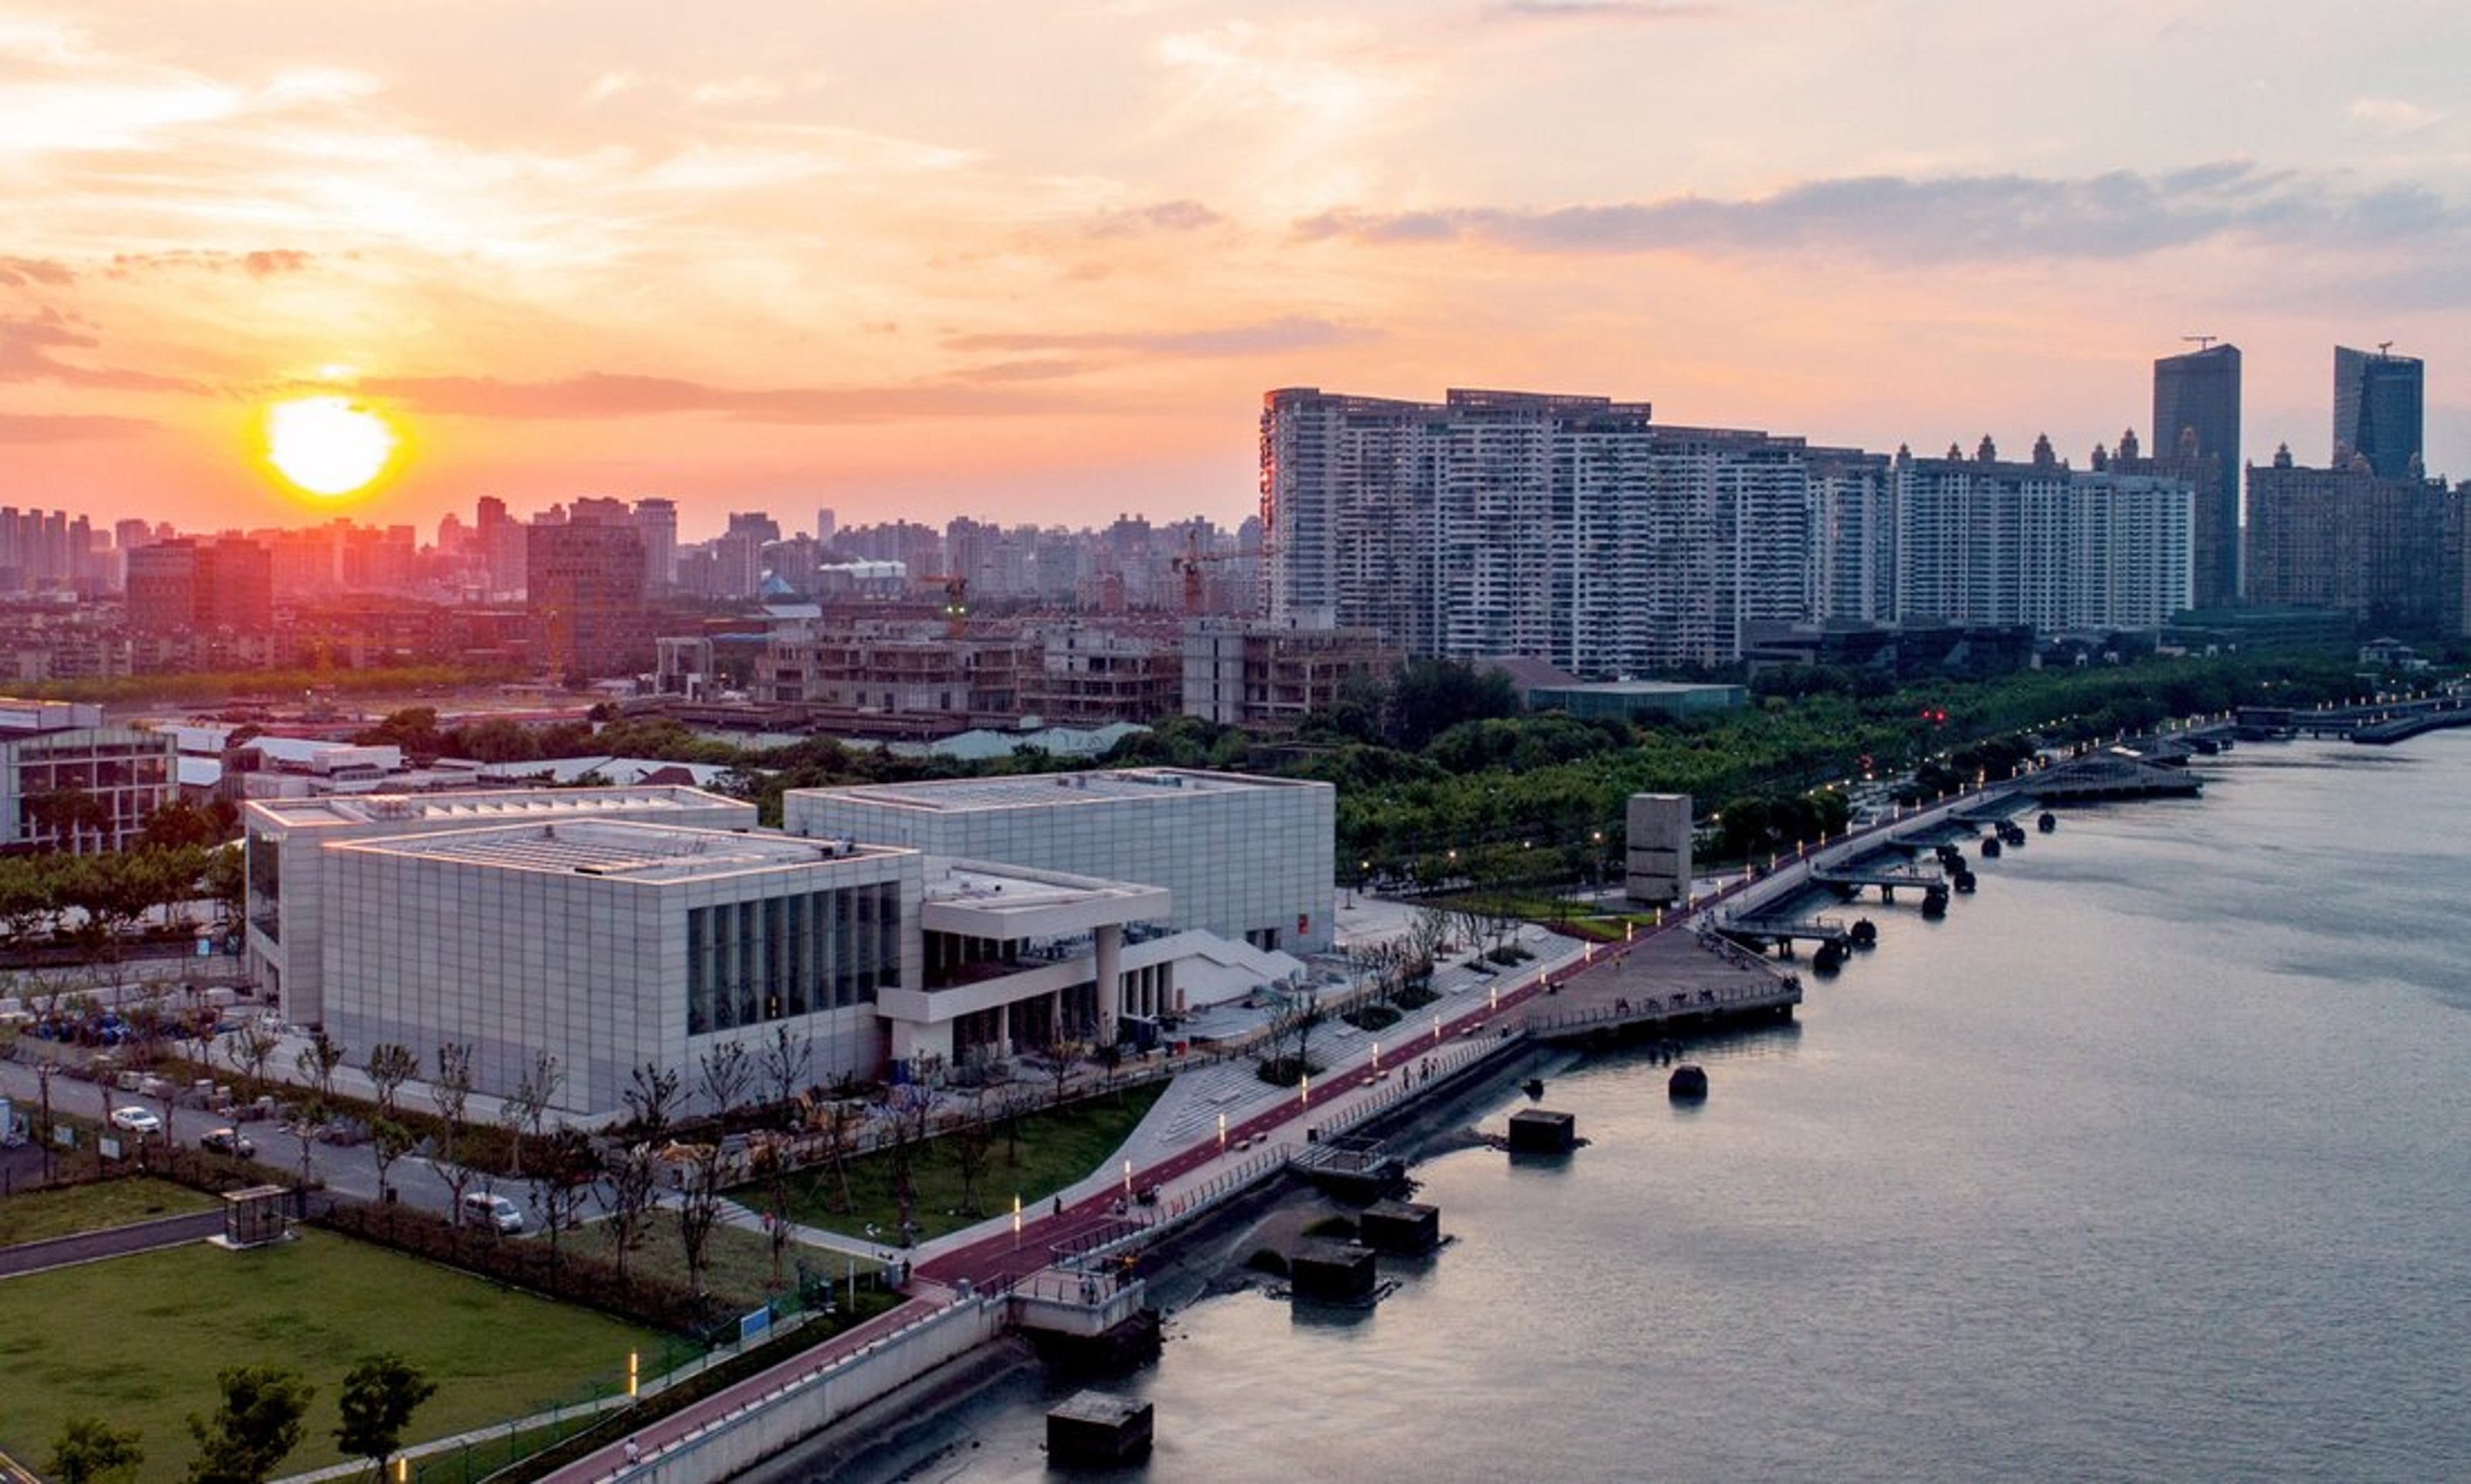 Wide angle view of the West Bund Museum in Shanghai from the outside at sunset.